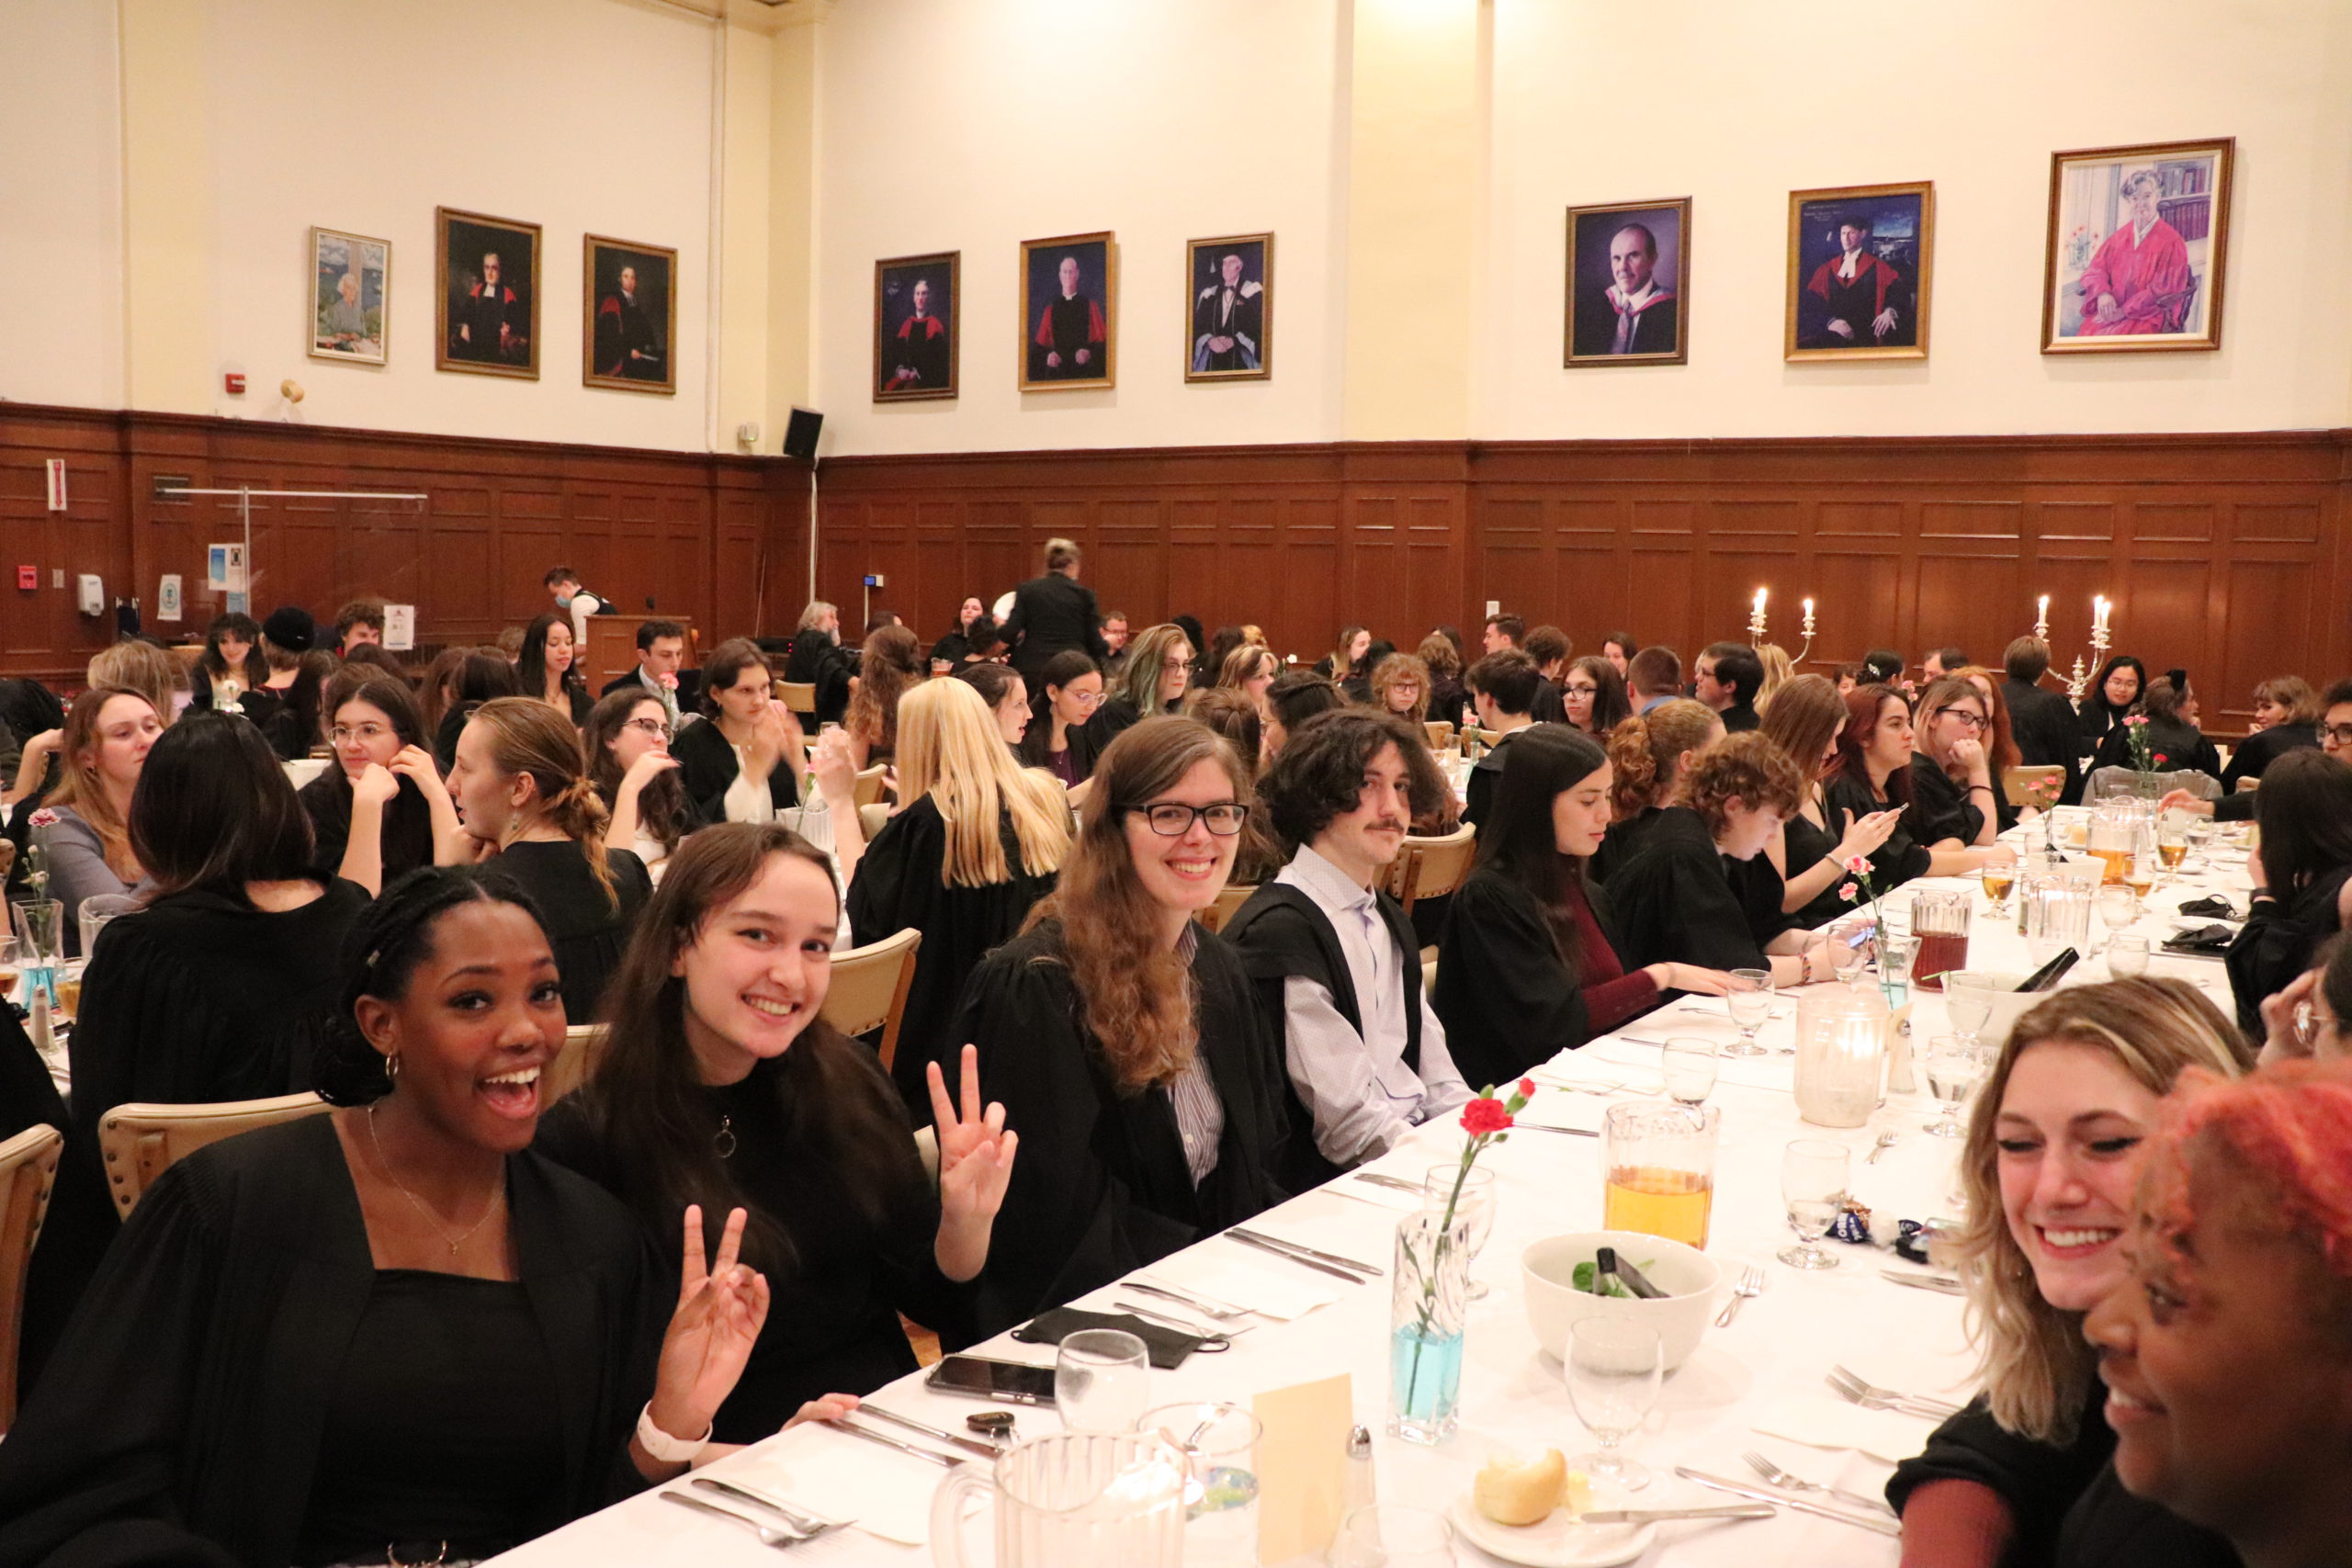 Students attend a Formal Meal at Prince Hall